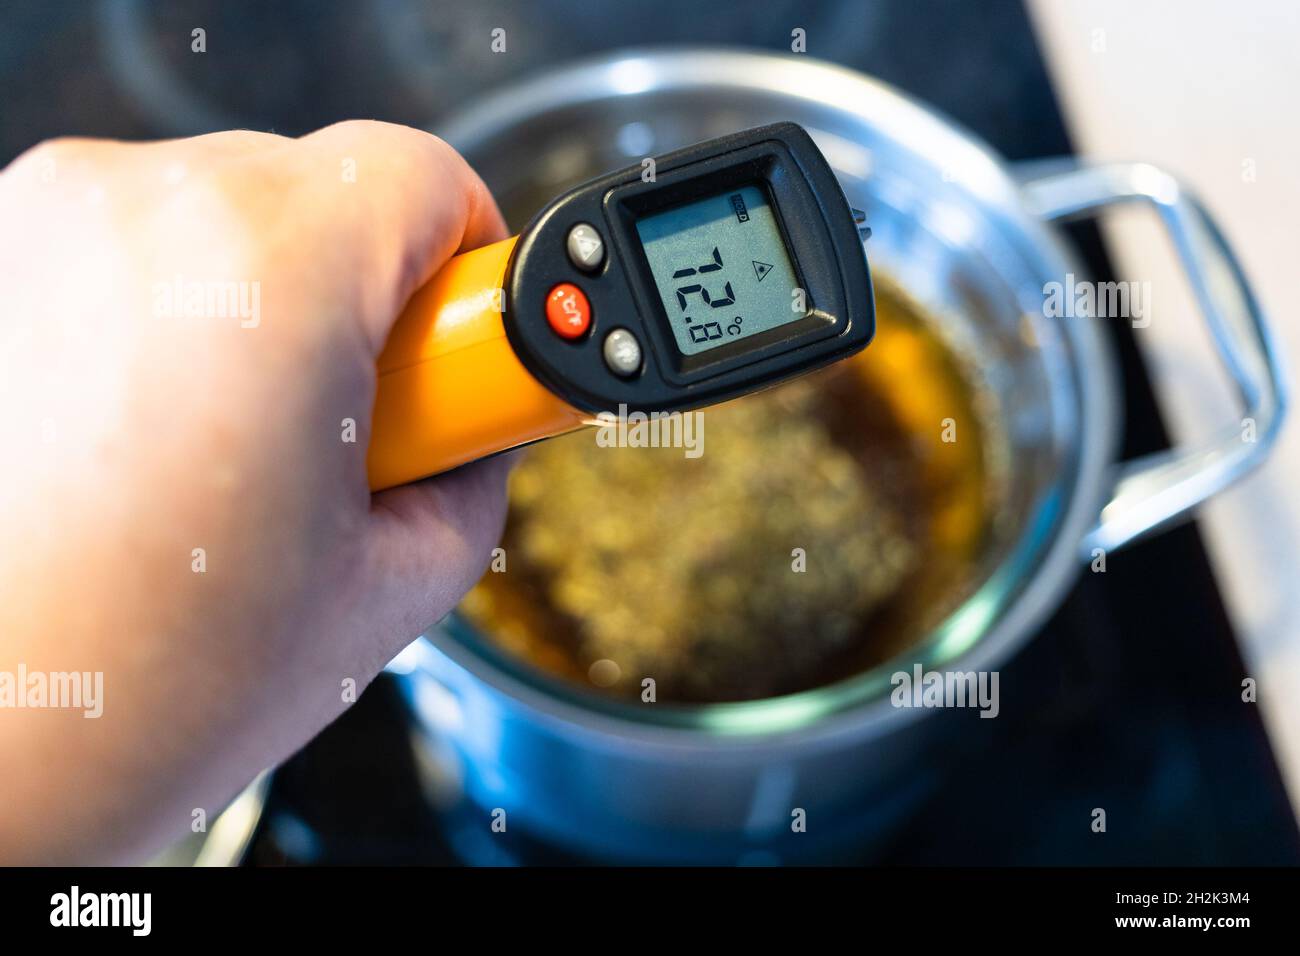 measuring temperature of cooking tincture from medicinal herbs in water bath by infrared thermometer on ceramic stove at home kitchen Stock Photo